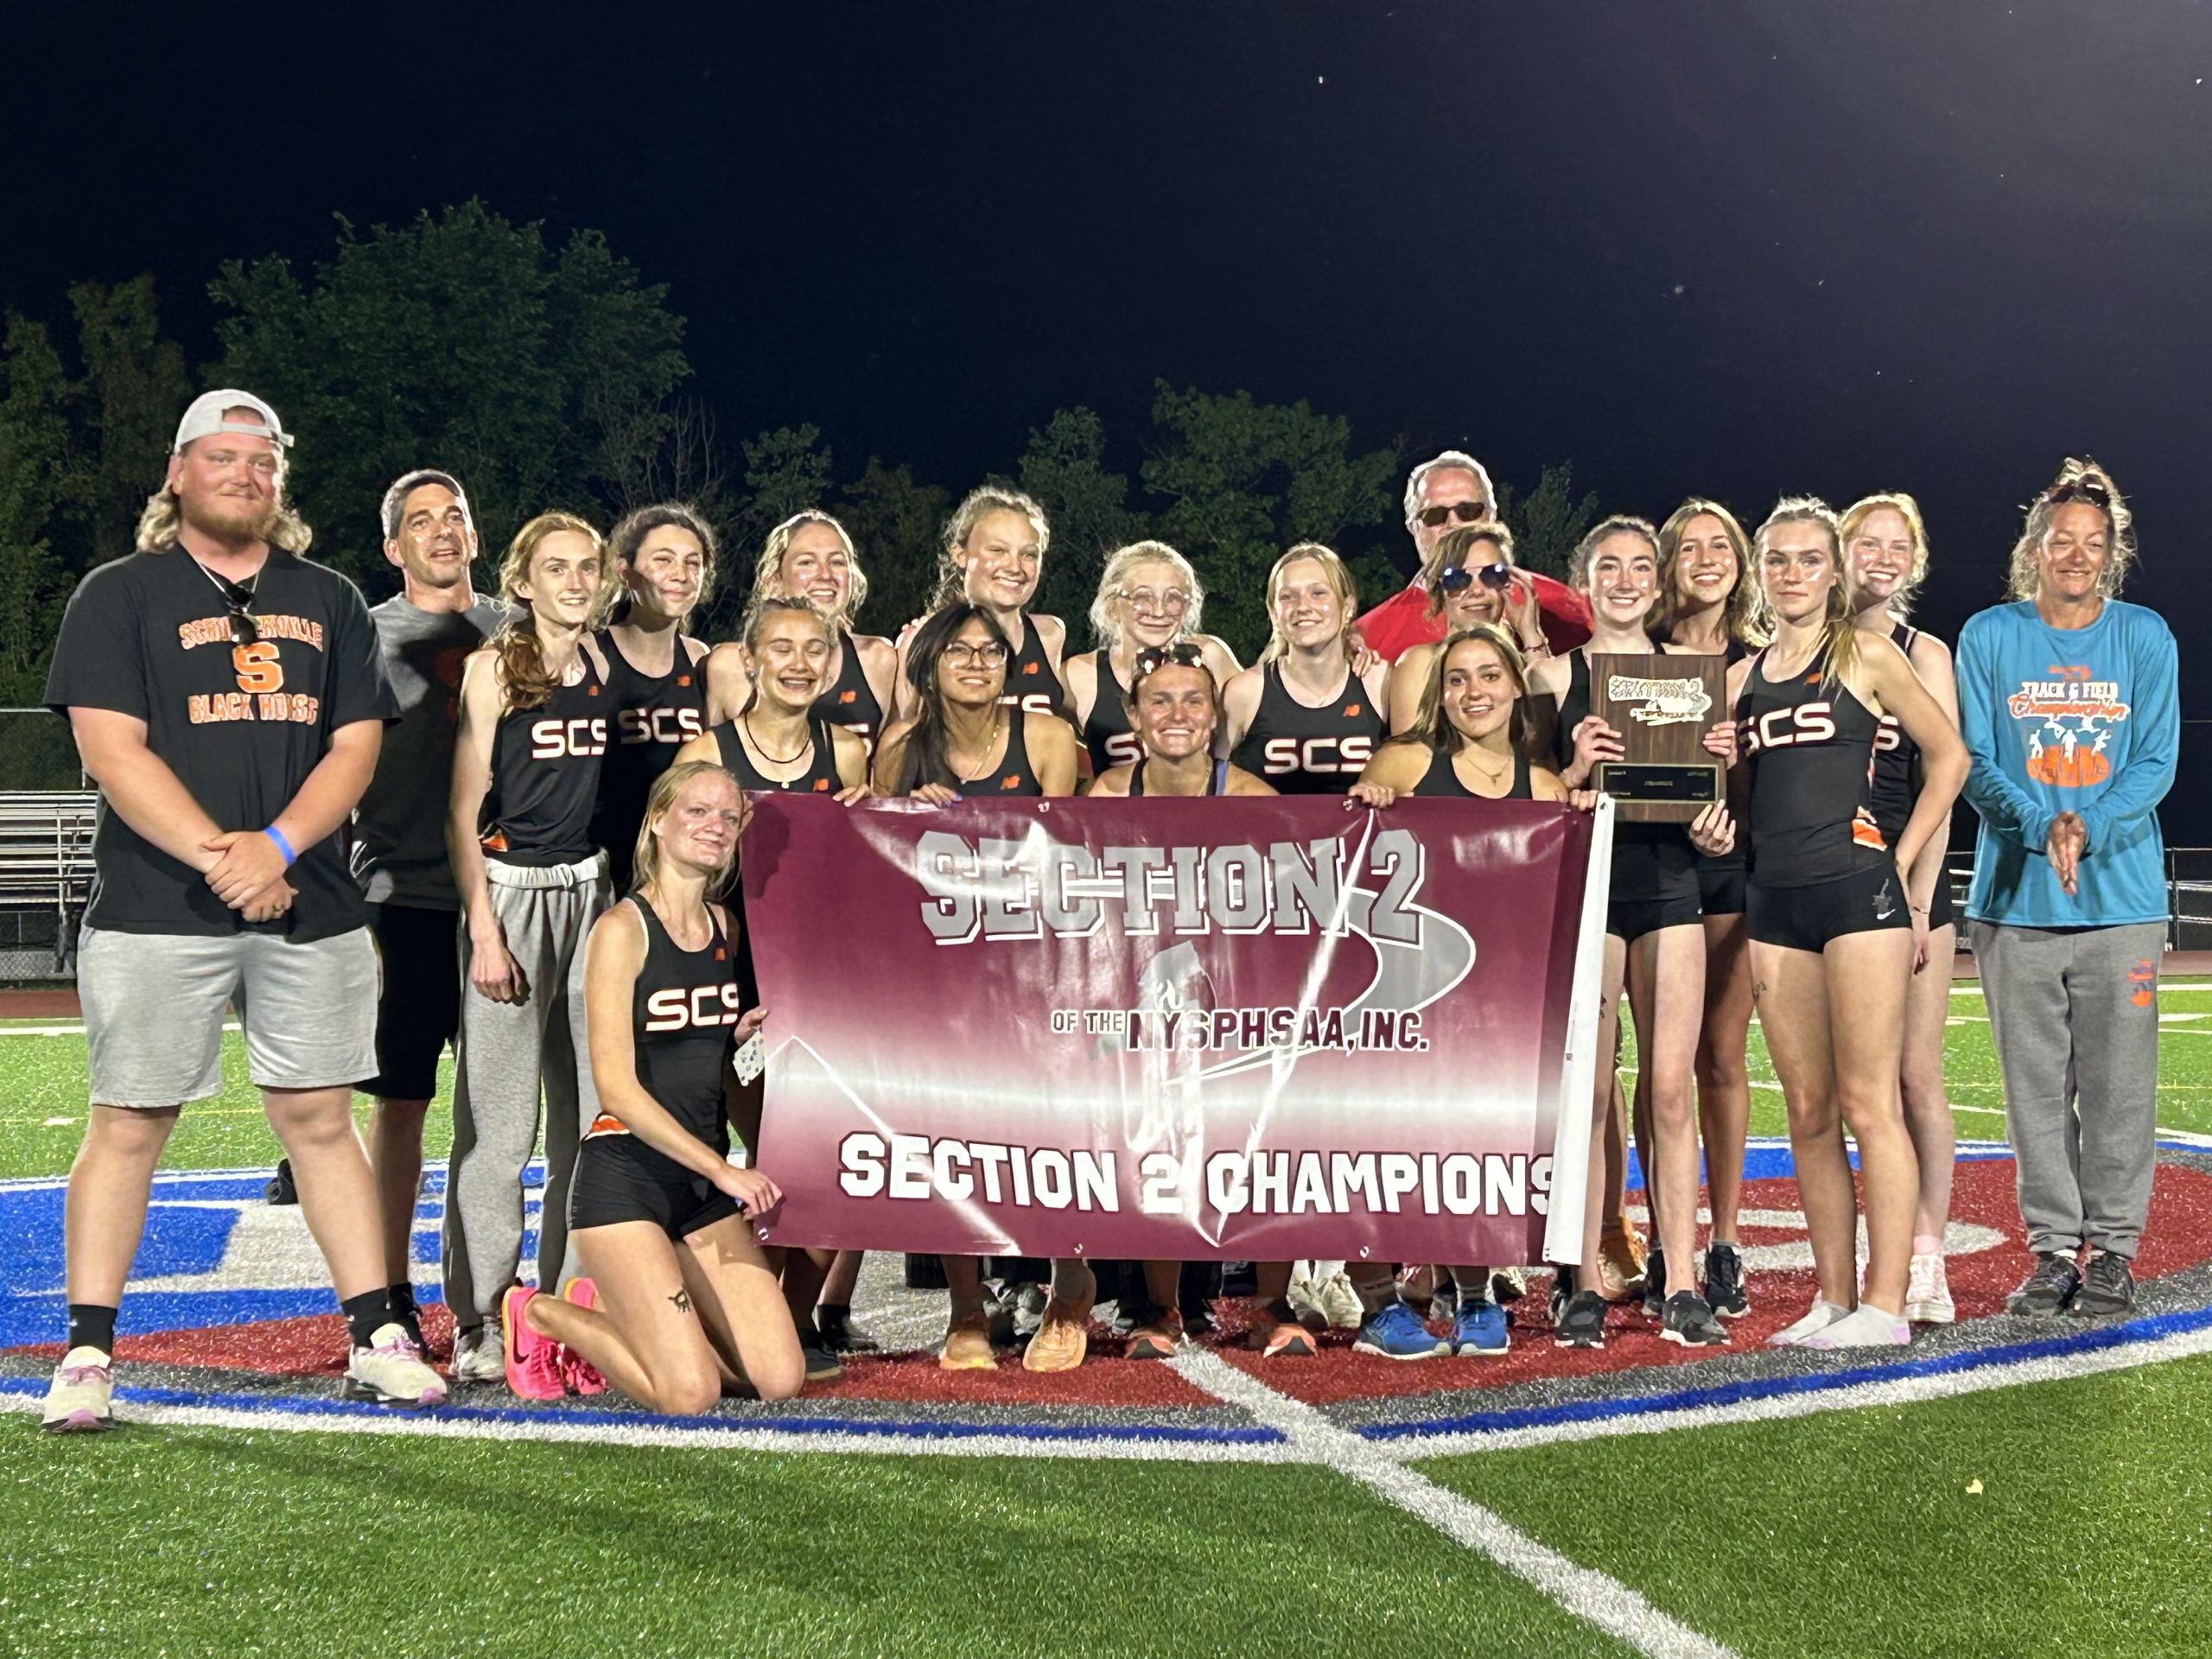 Schuylerville High School varisty girls outdoor track and field team wins Section 2 Division 3 championship